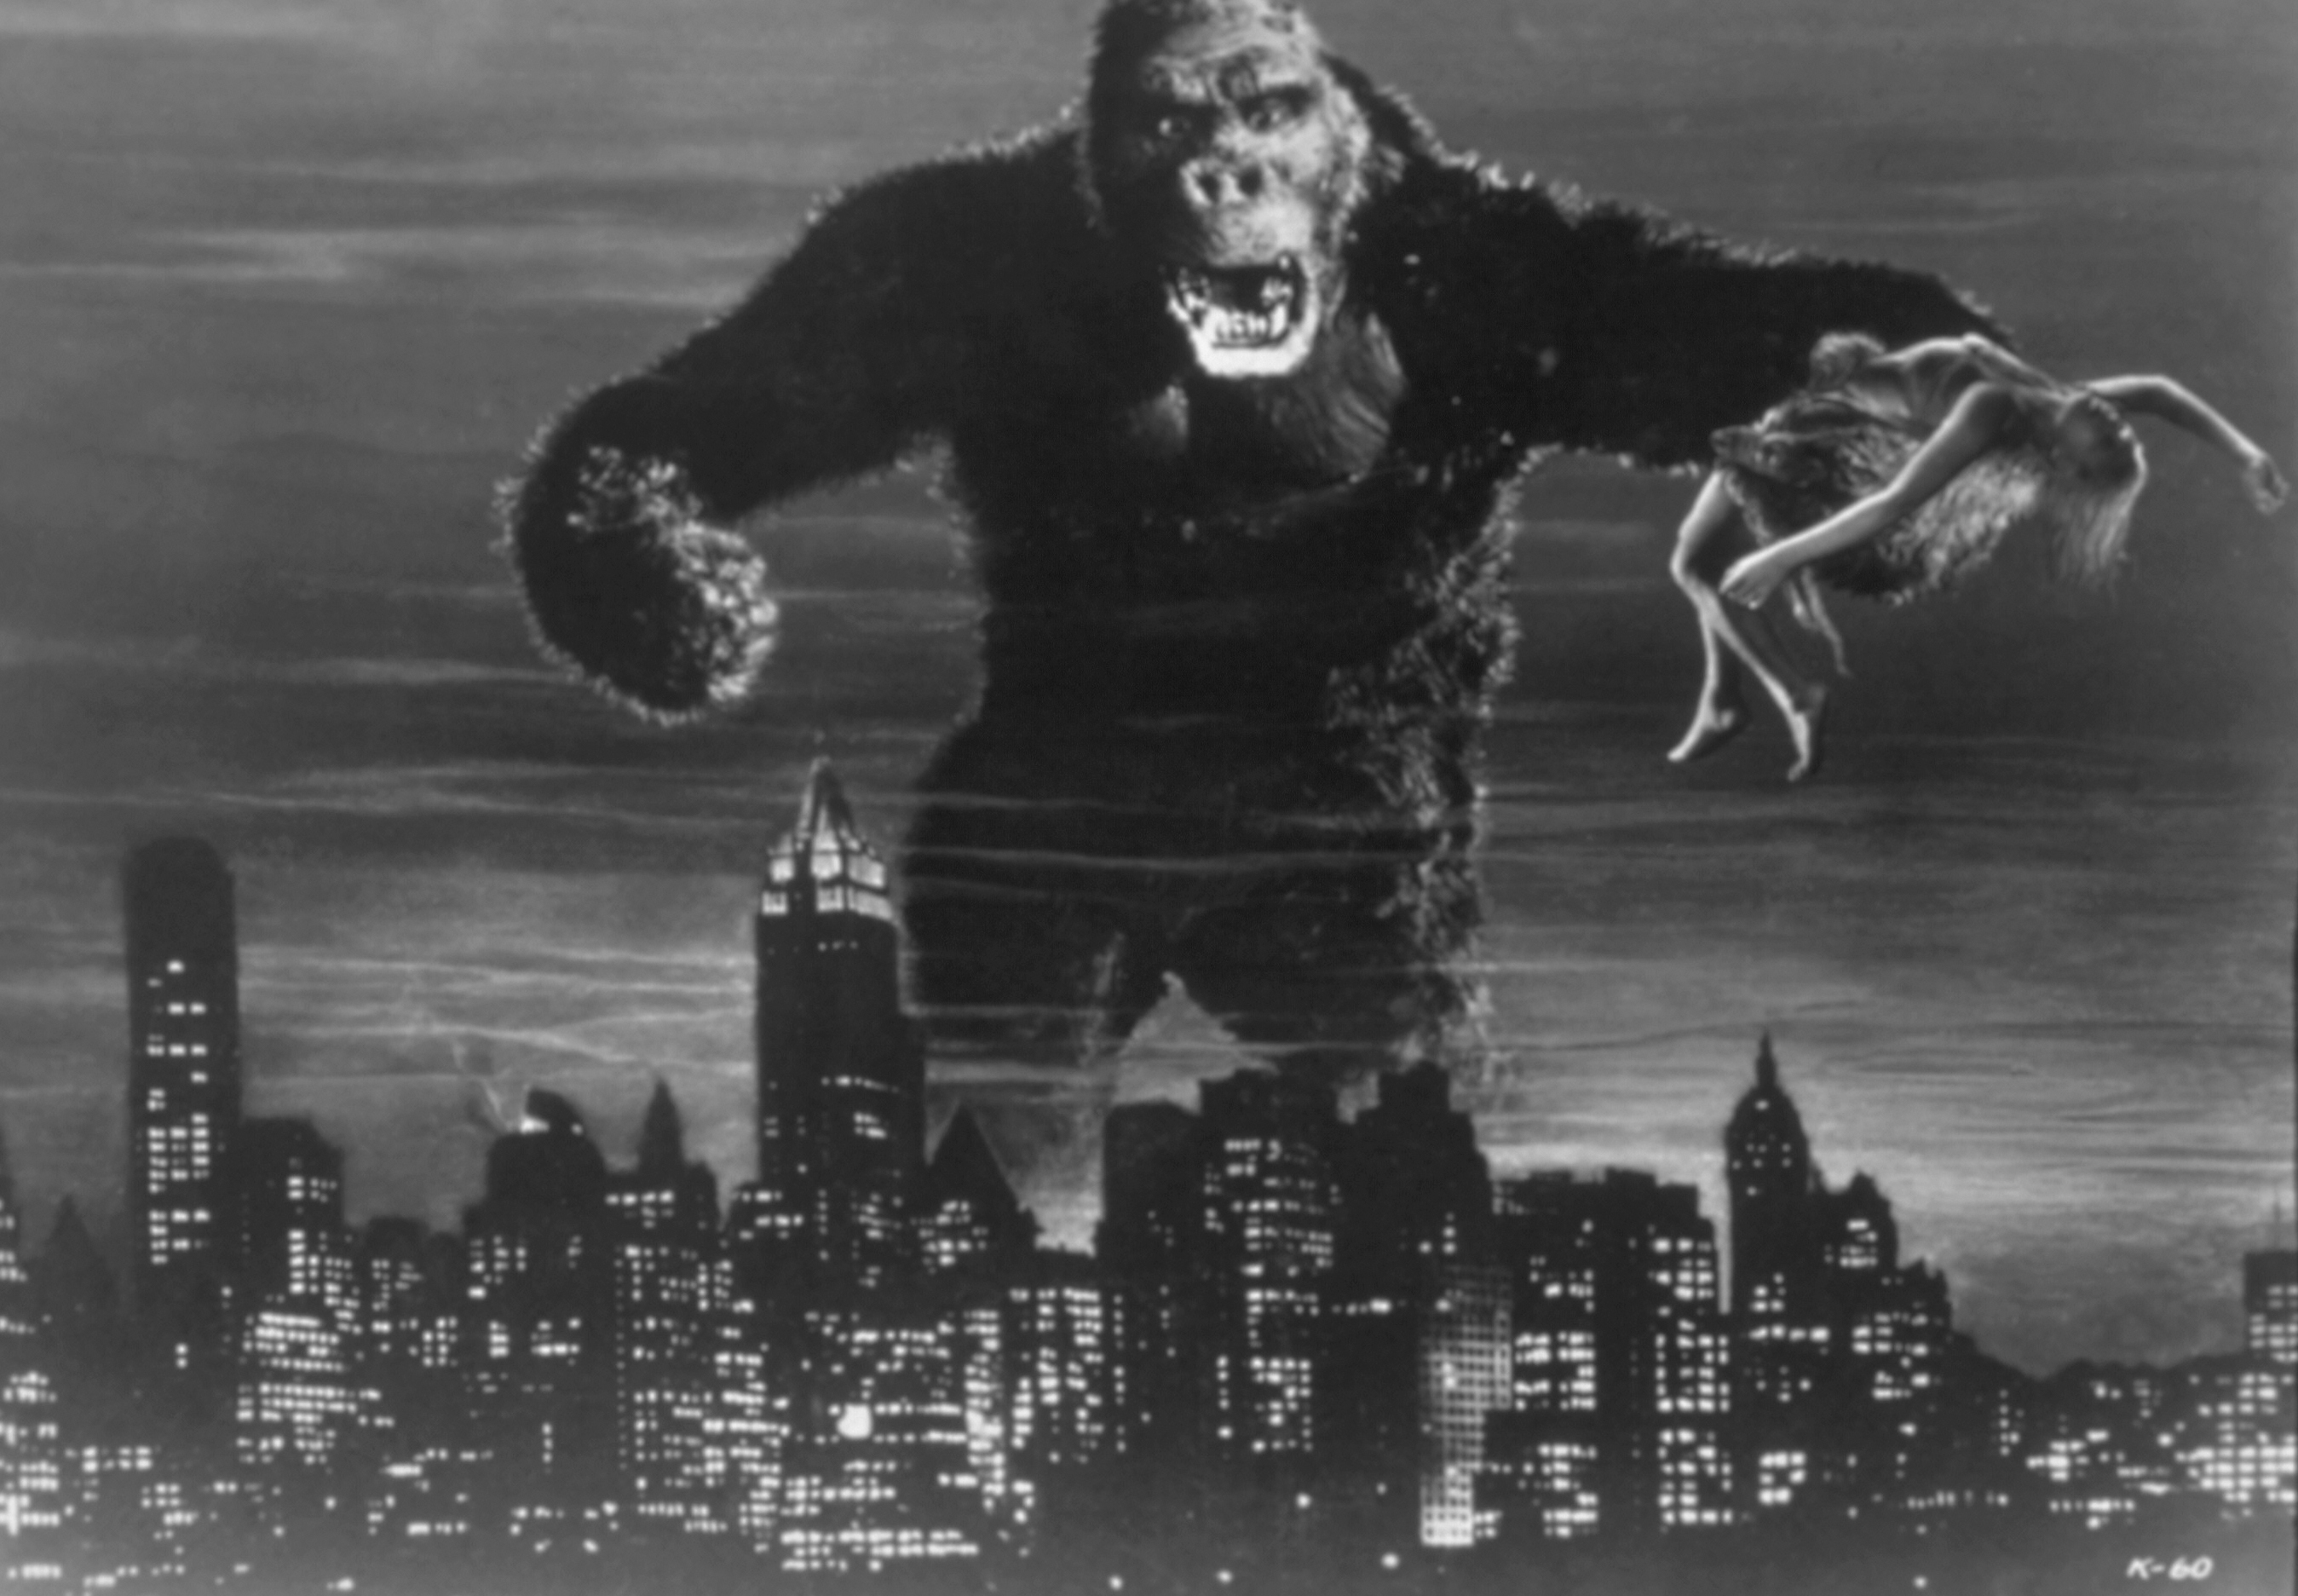 A movie still from “King Kong” showing the ape holding a woman and rampaging across a city skyline